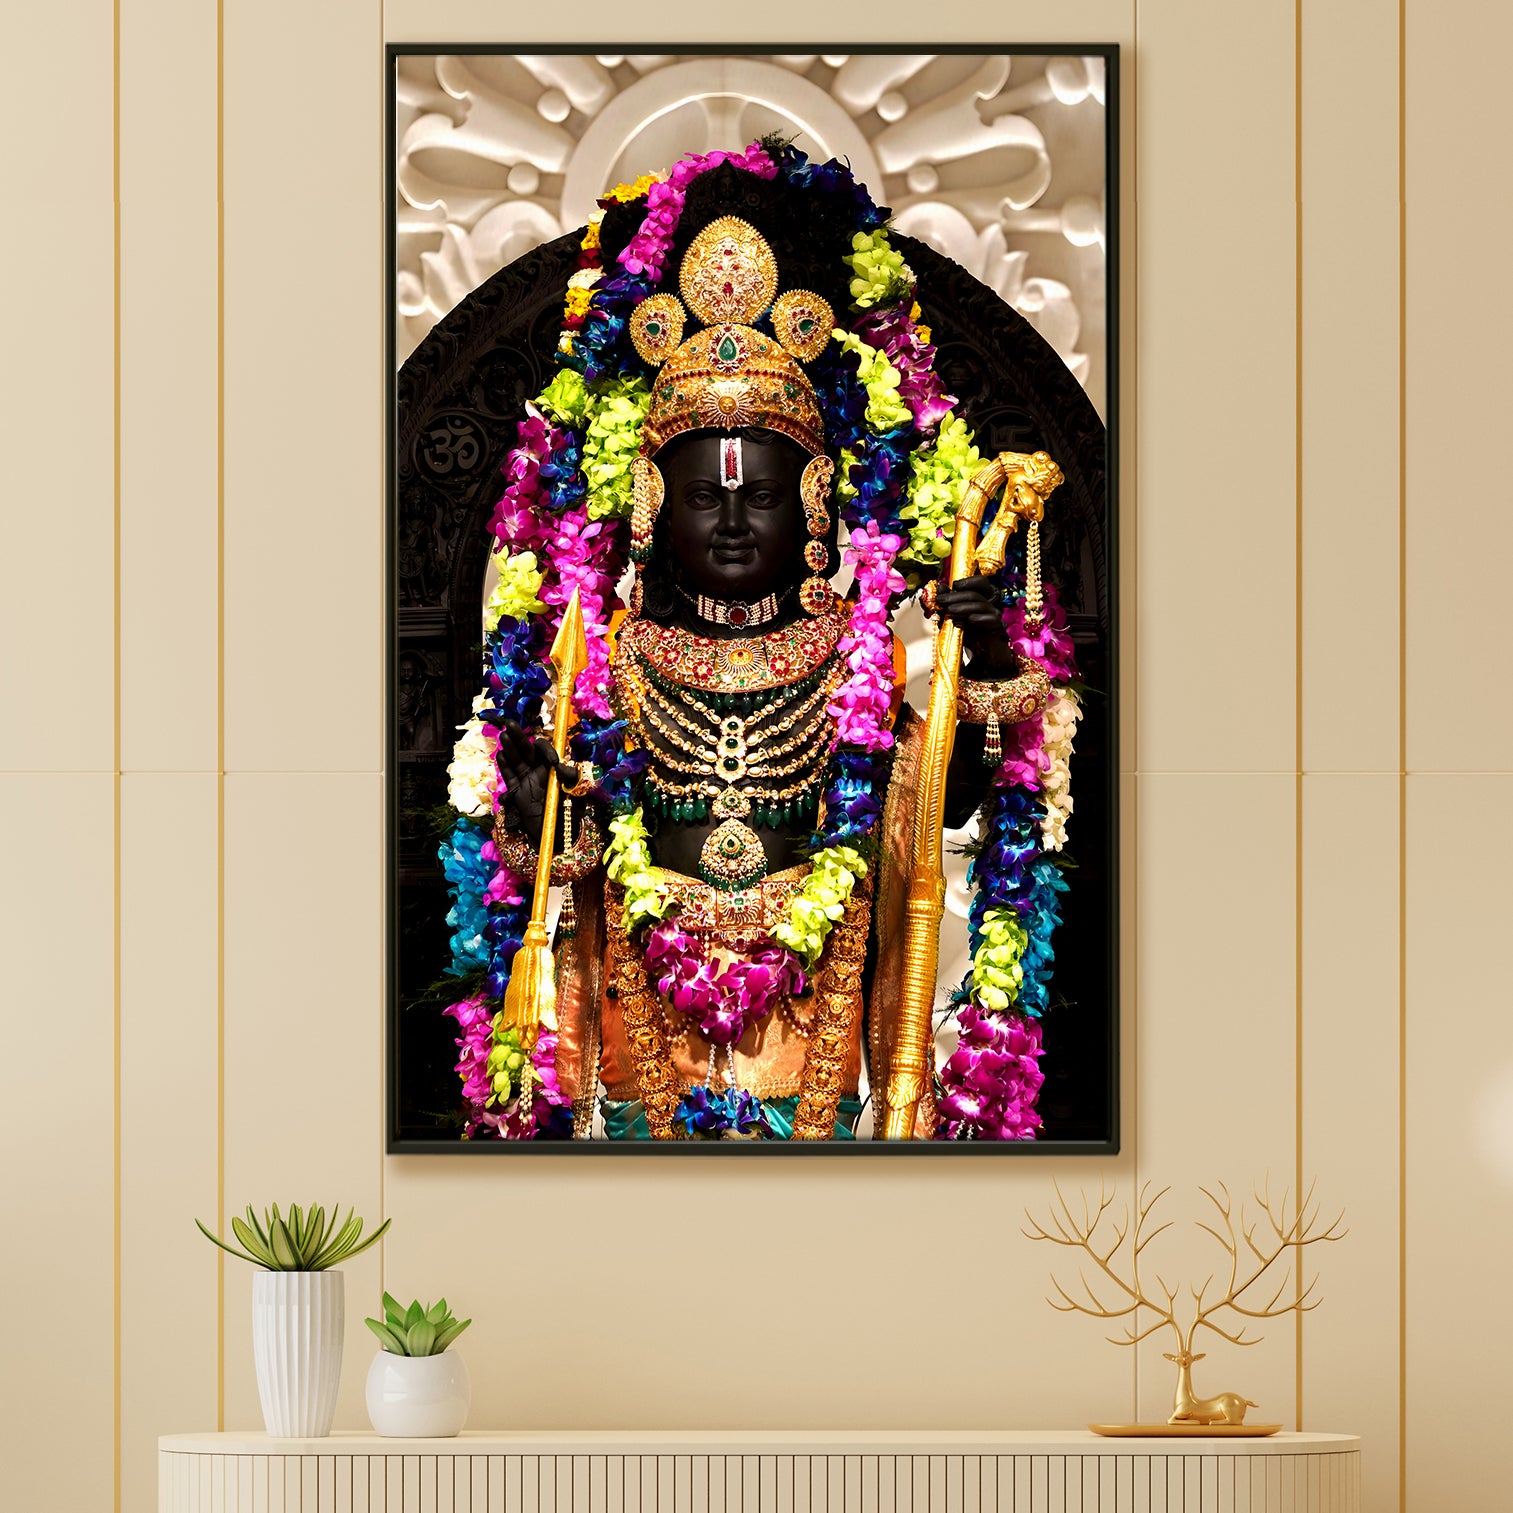 A Divine Encounter: A Ram Lalla Painting Print Canvas Framed Artwork That Captures the Heart